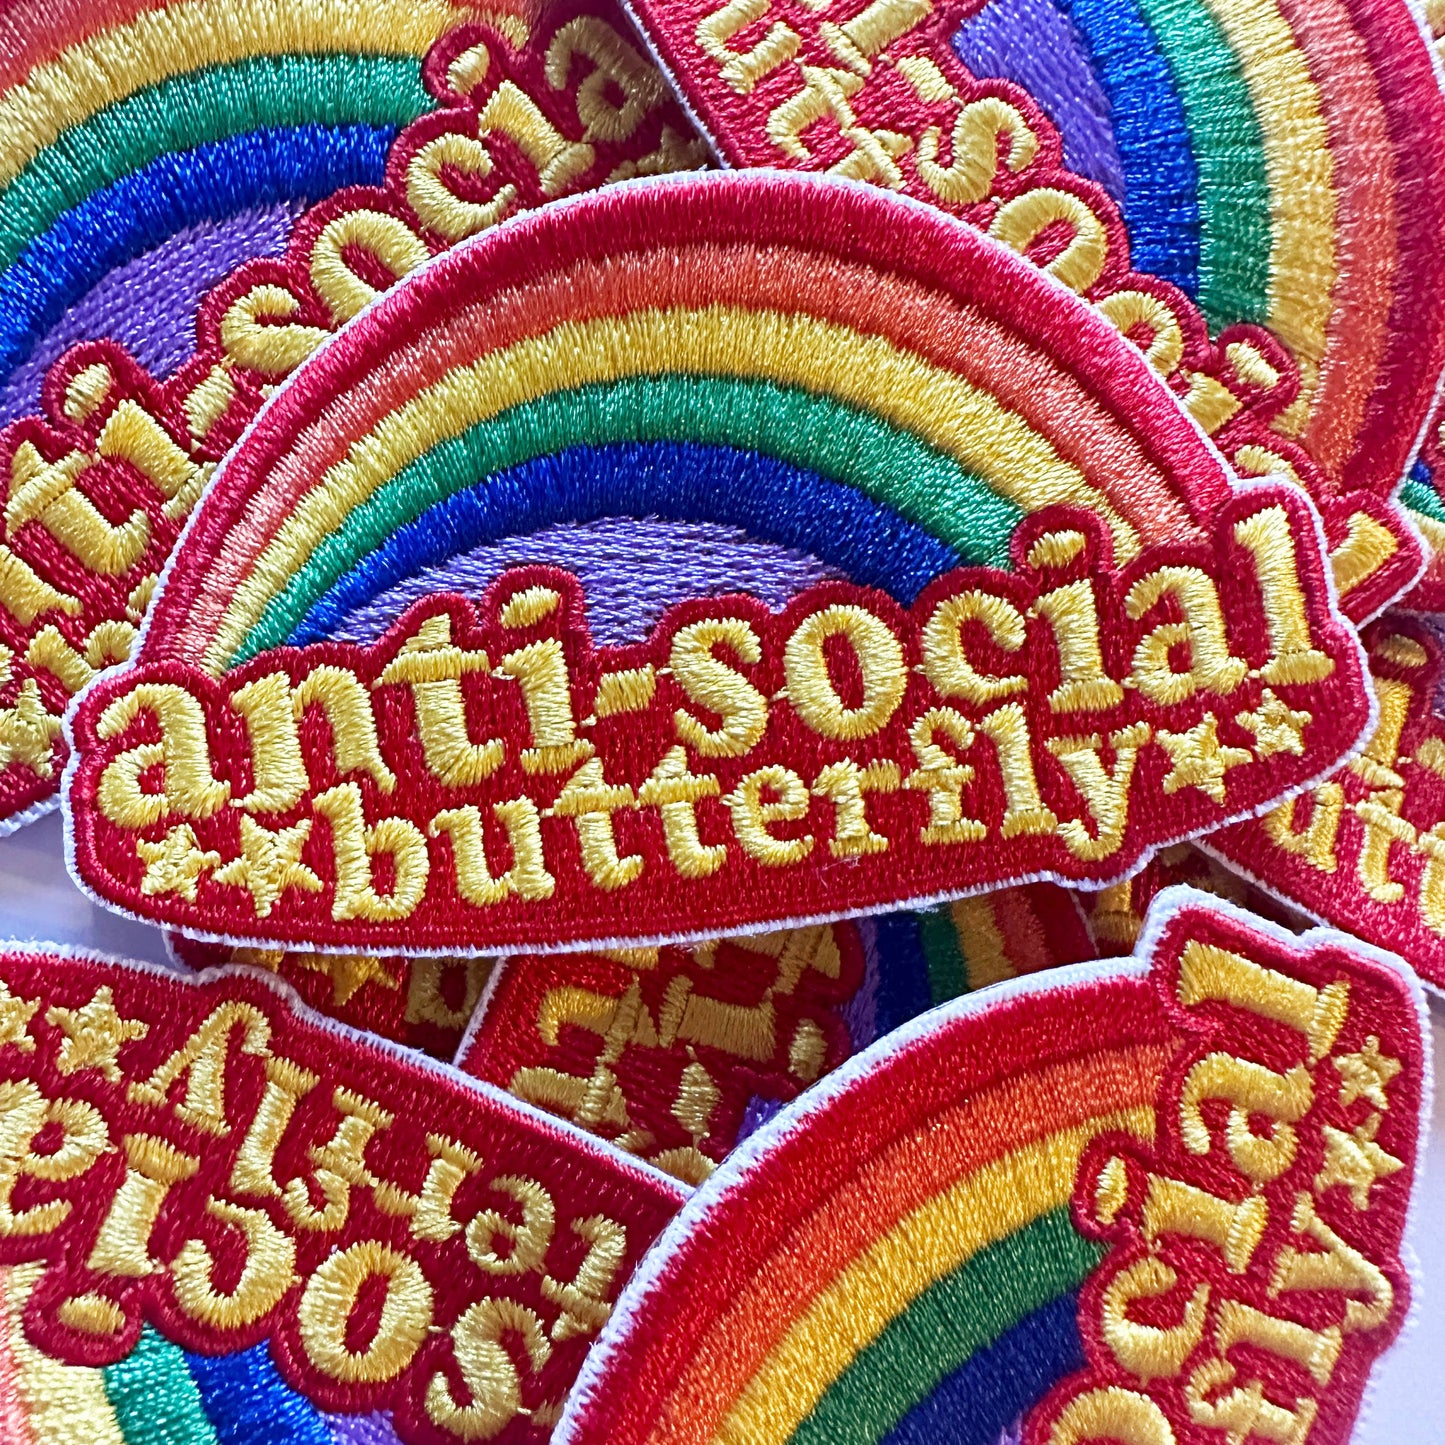 Anti-Social Butterfly Iron On Embroidered Patch